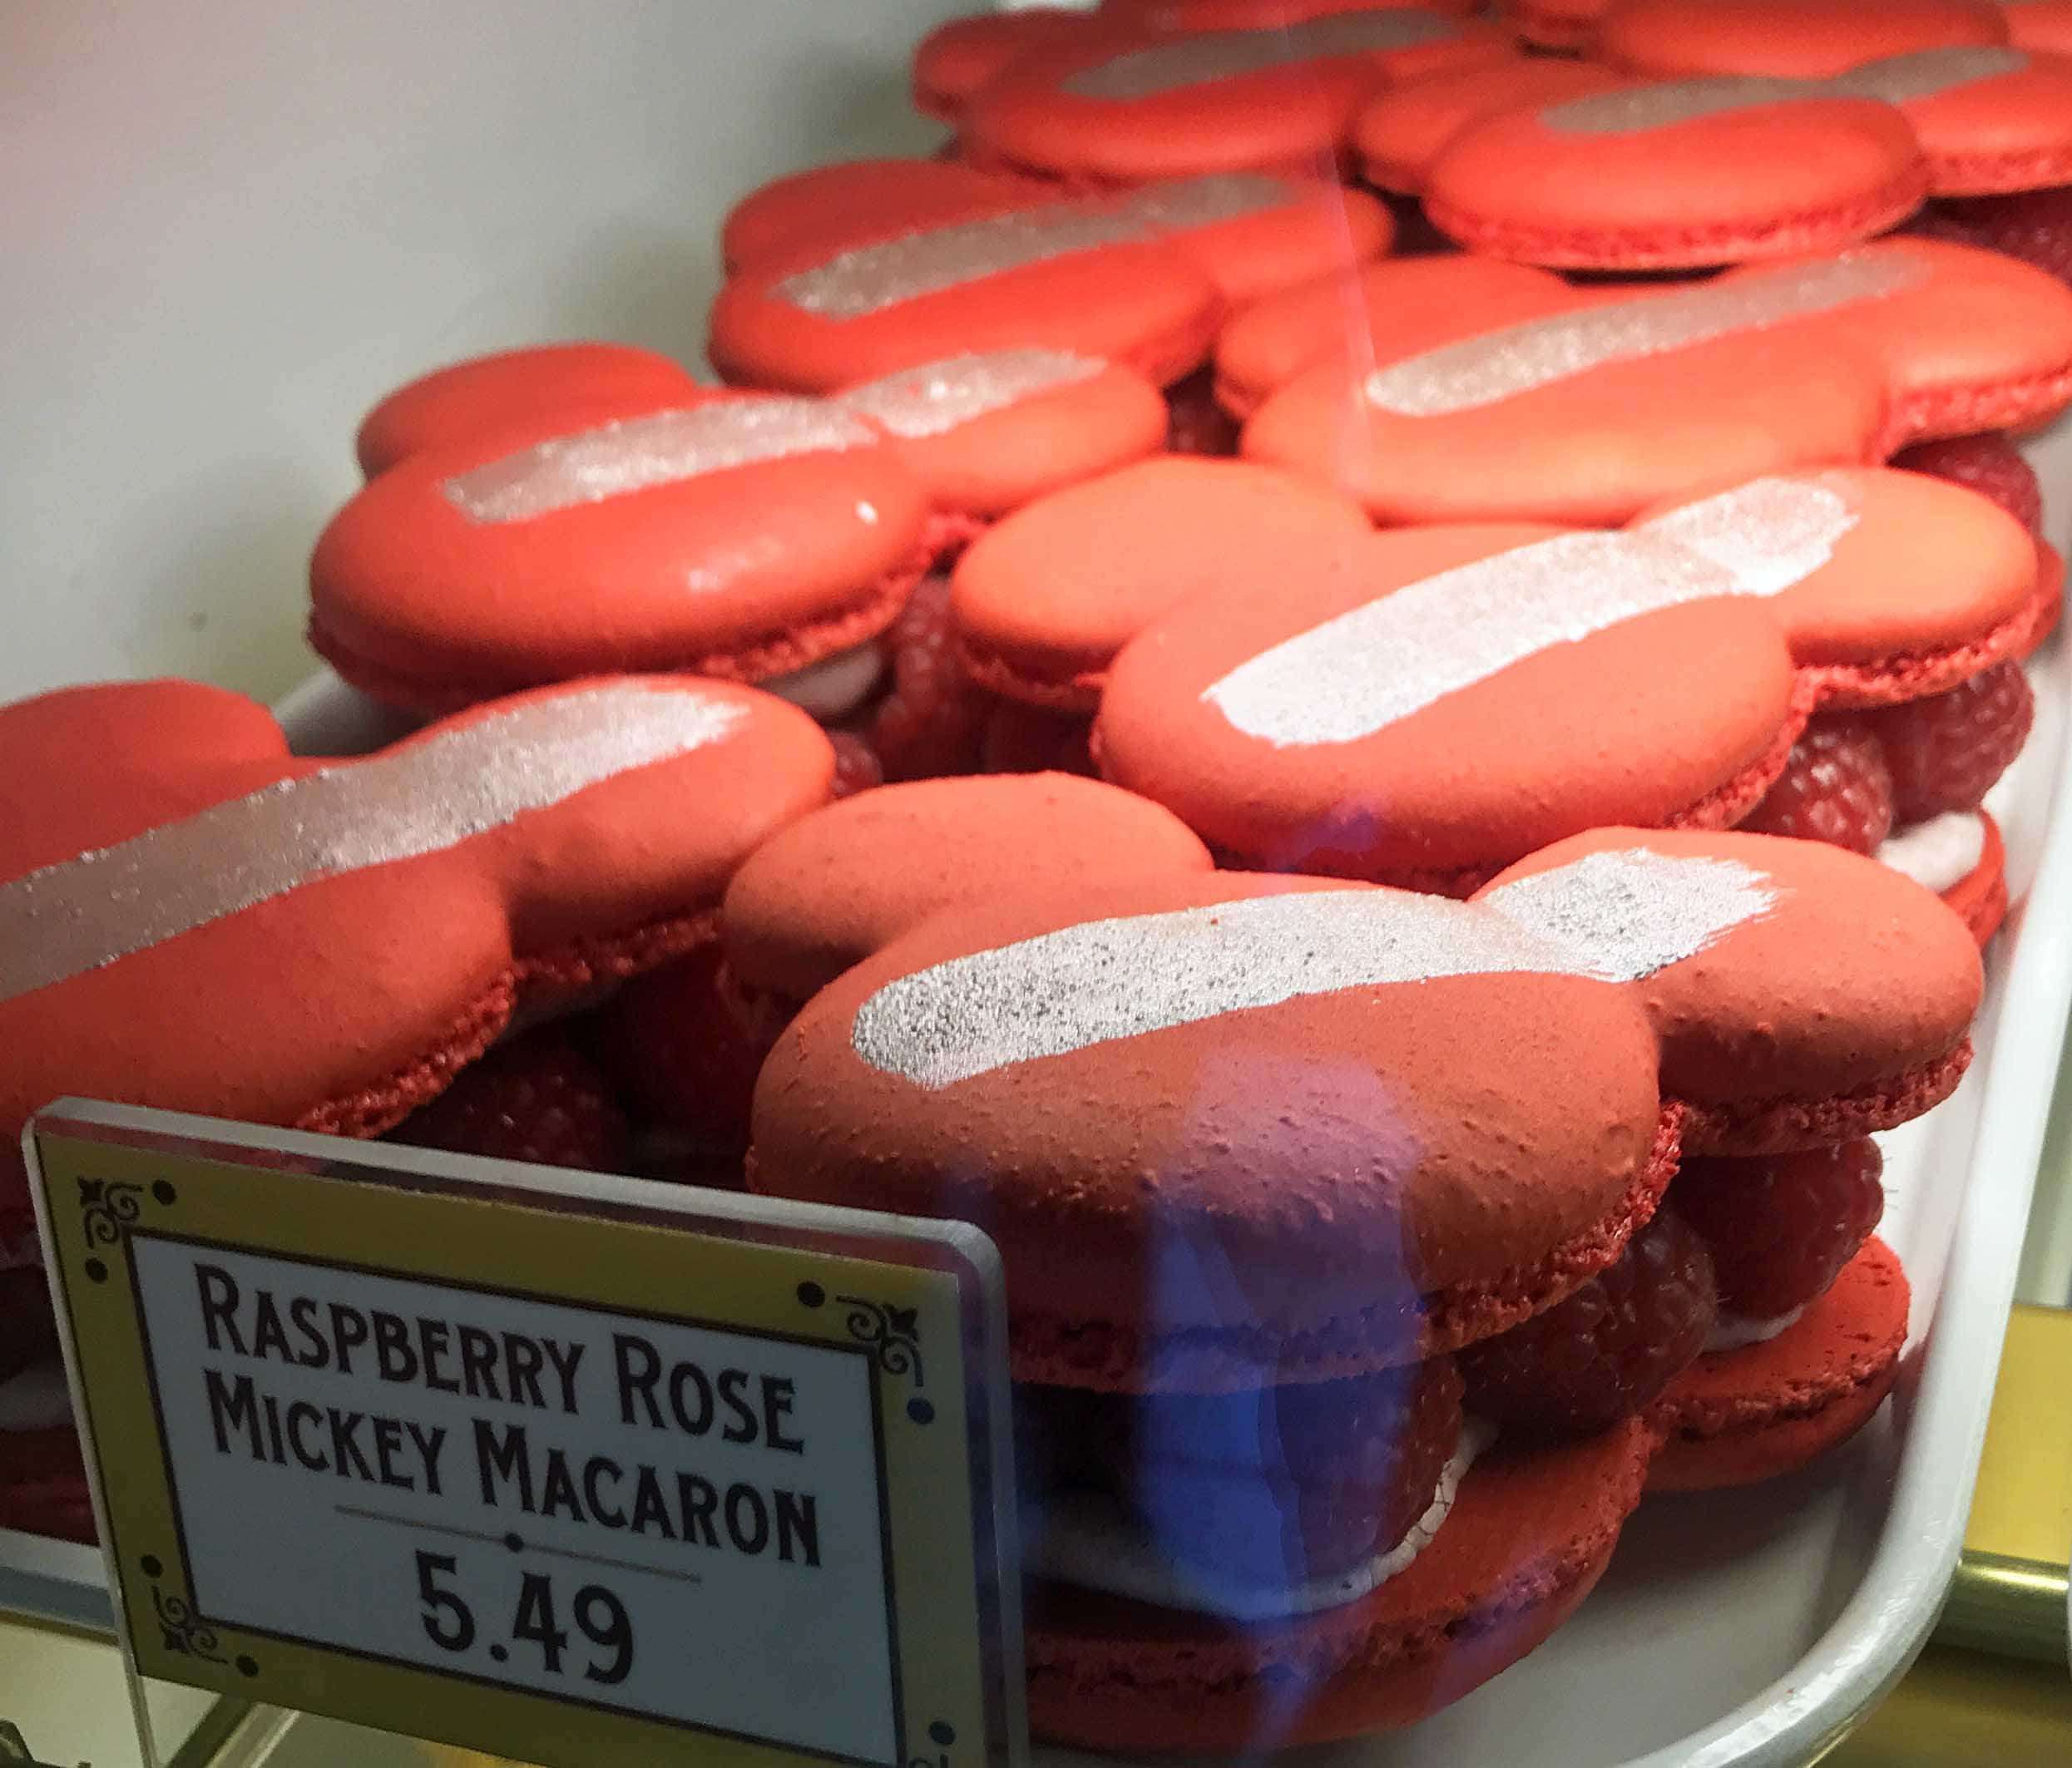 Raspberry Rose Mickey Macaron. The Best Eats and Treats at Disneyland. The best food to eat at Disneyland. A list of the most popular and favorite food at Disneyland parks. A list of what to eat at Disneyland. www.modernhoney.com